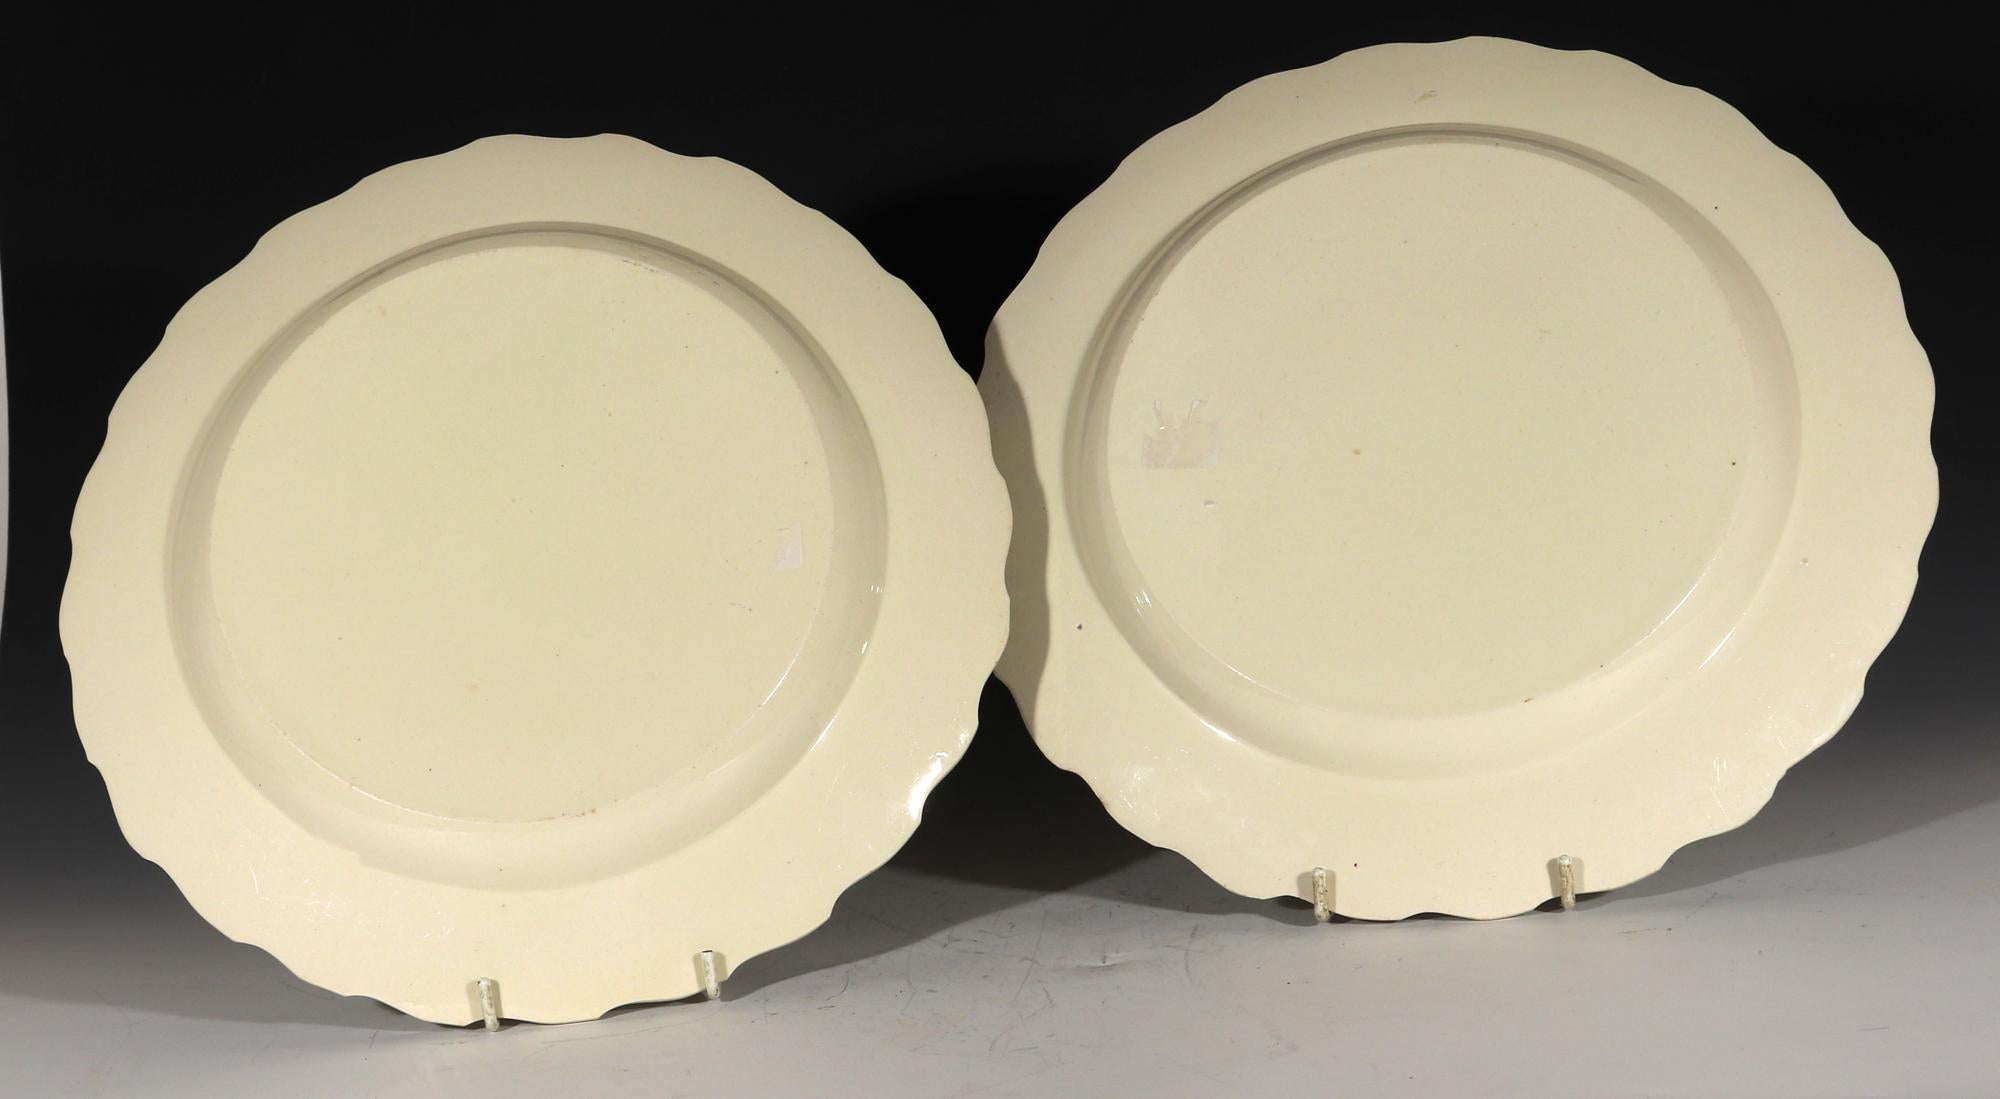 From a collection of creamware dishes-
Antique Creamware Feather-edged Circular Dishes,
Pair,
Probably Leeds,
1780-1800

The deep plain creamware circular dishes have a moulded feather edge rim with a wonderful cream color. These dishes could